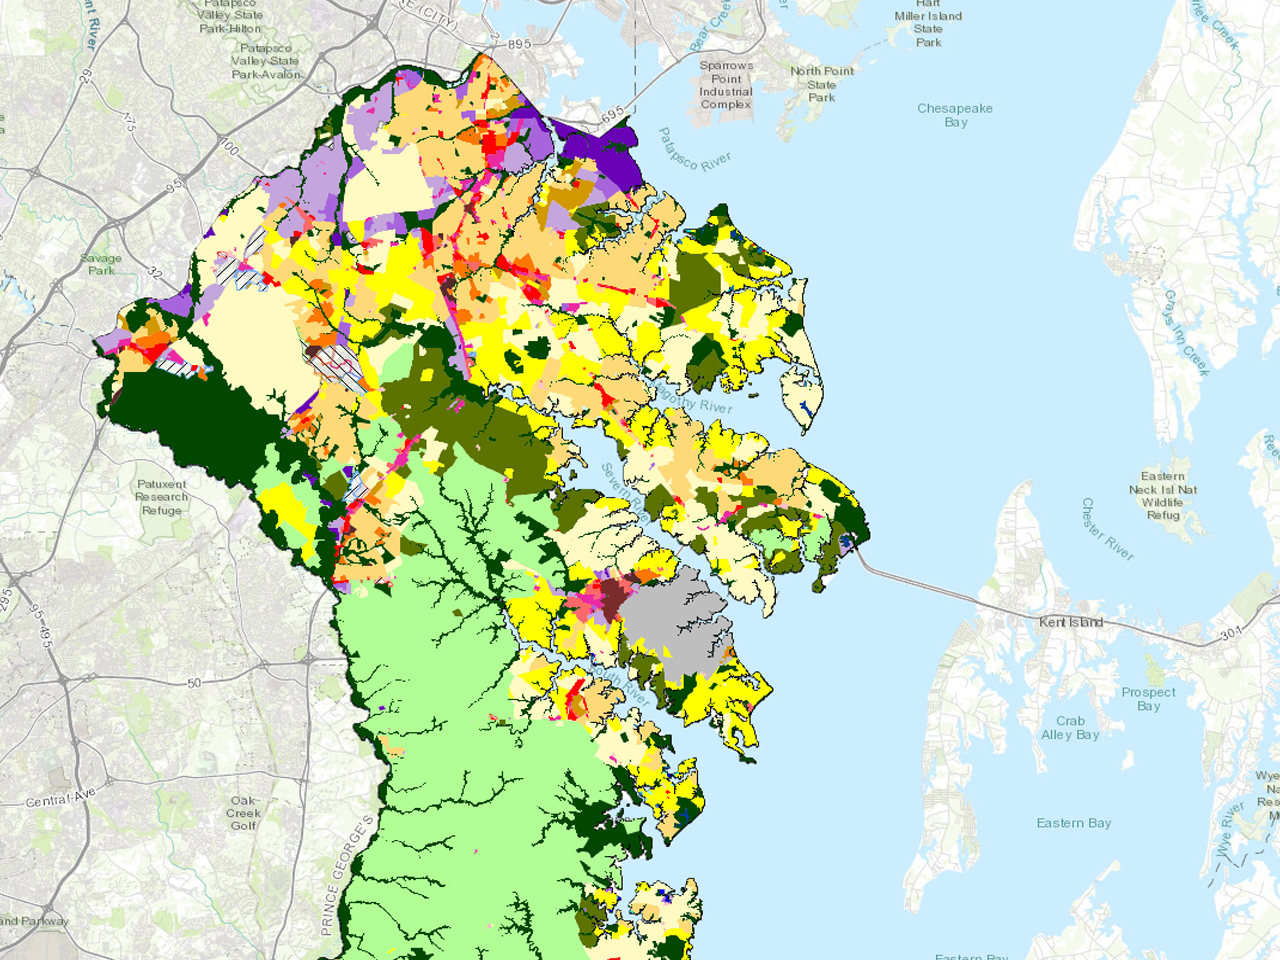 Geographic Information Systems (GIS) of Anne Arundel County